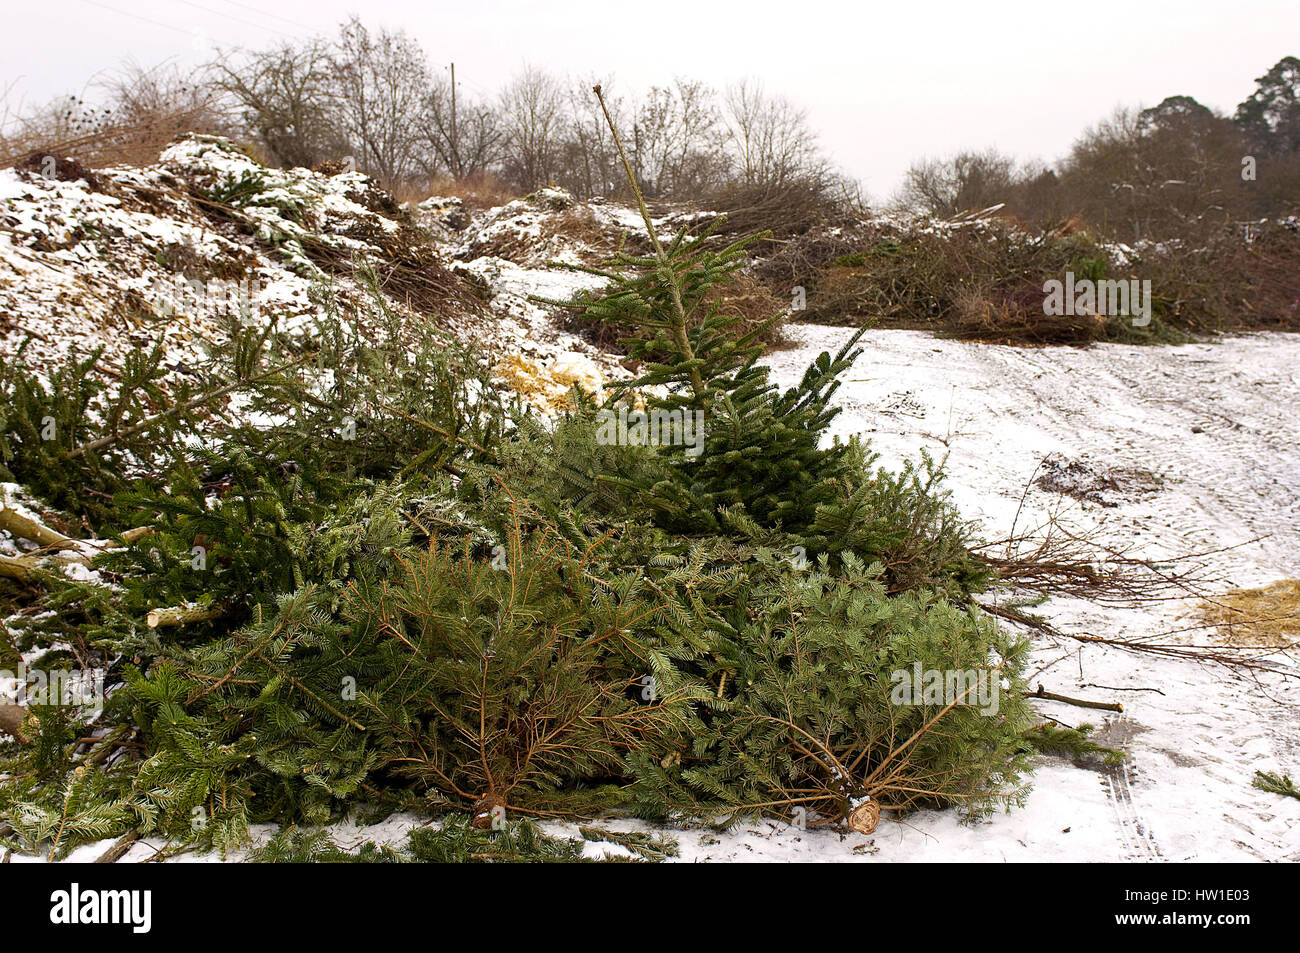 End of a Christmas tree, Ende eines Weihnachtsbaum Stock Photo